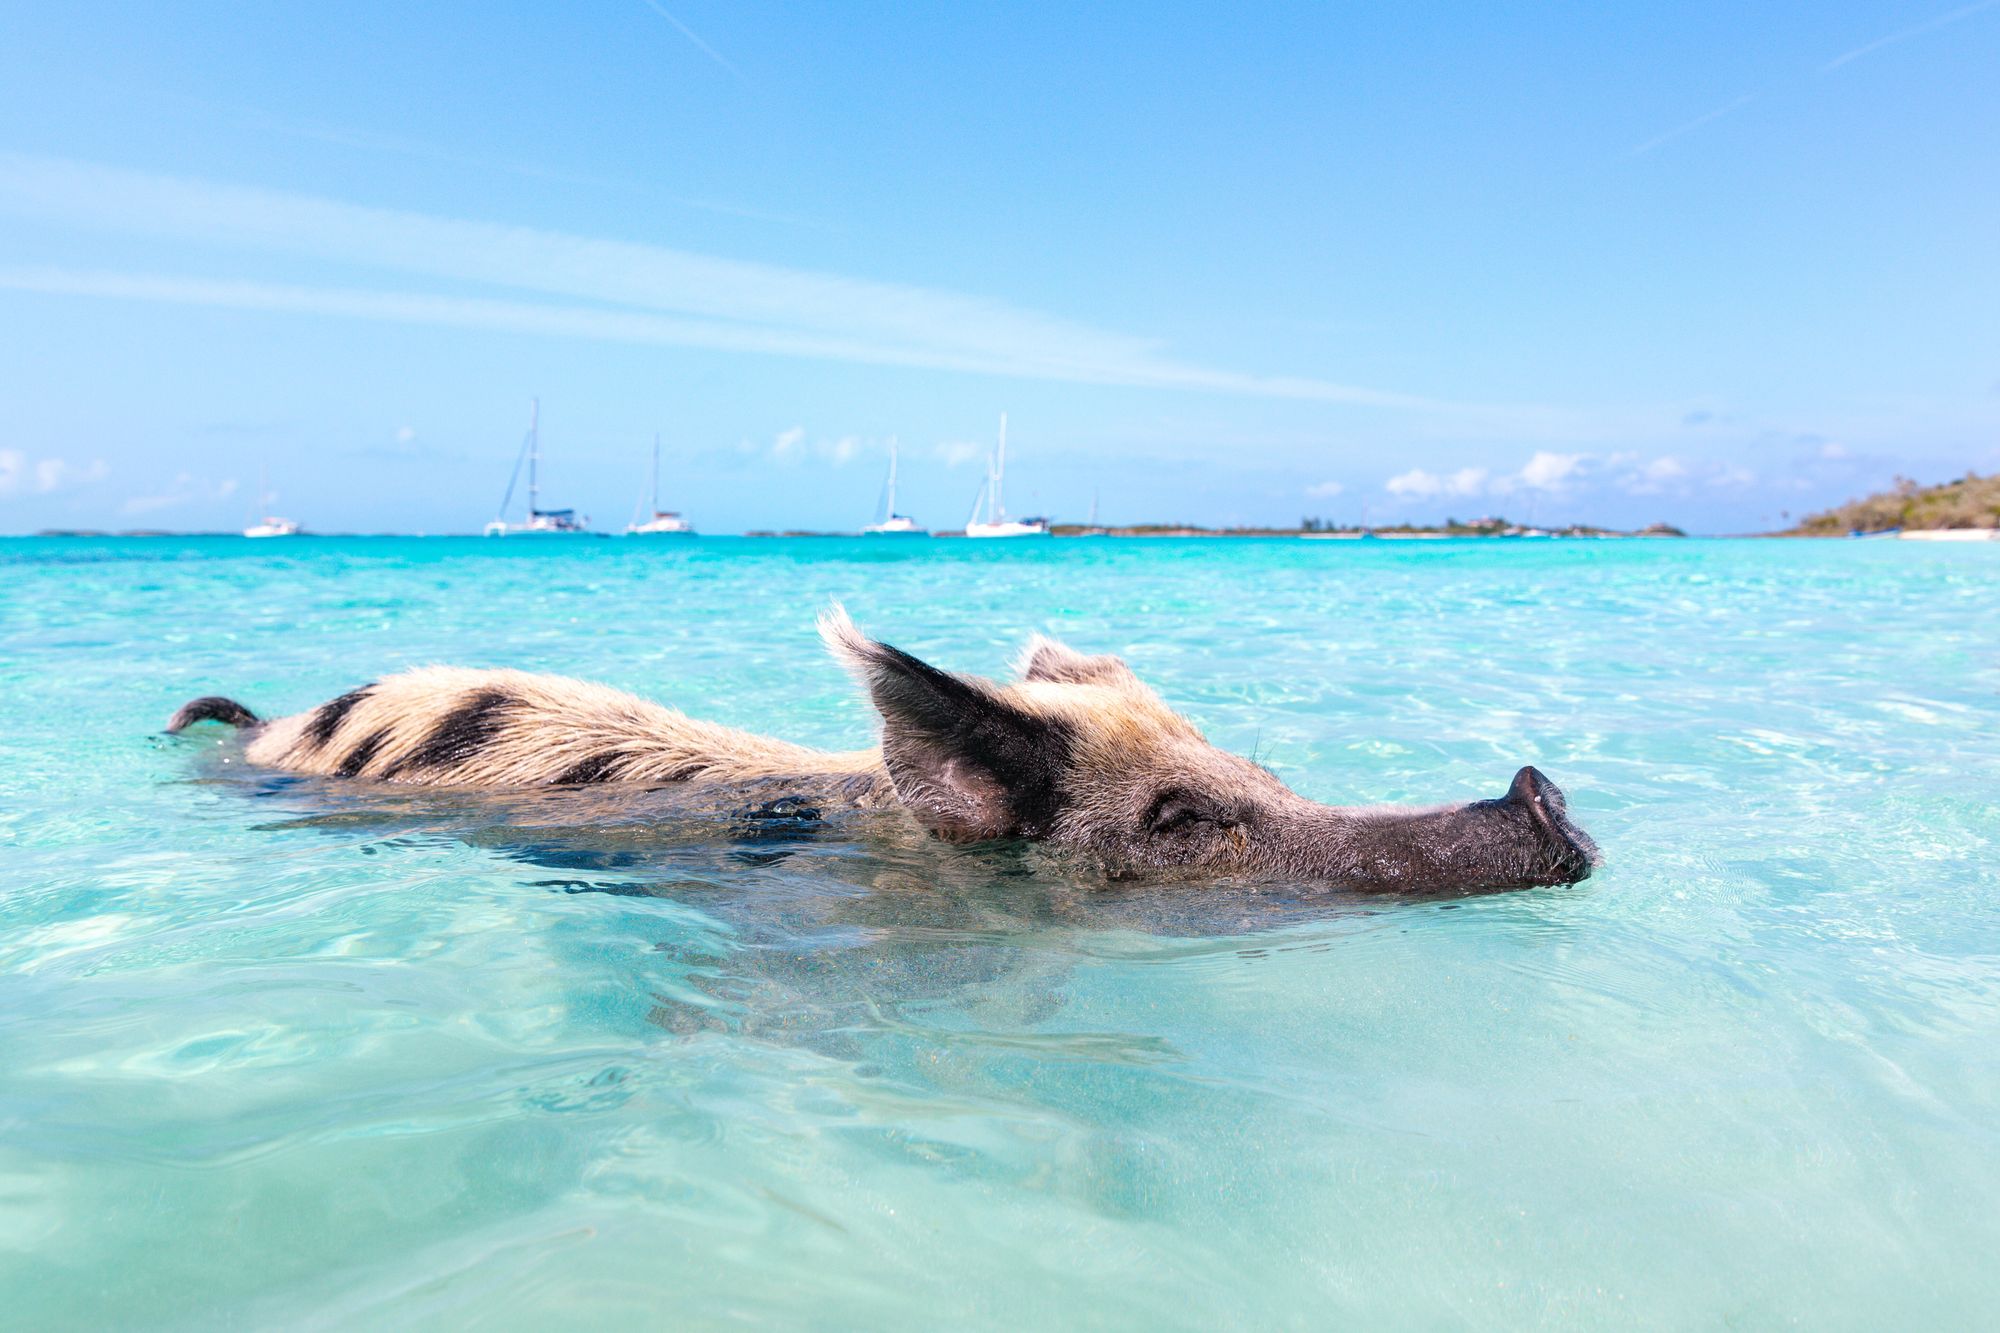 Adorable, Wild, & Fun - Here’s How To Meet The Swimming Pigs Of The Bahamas!